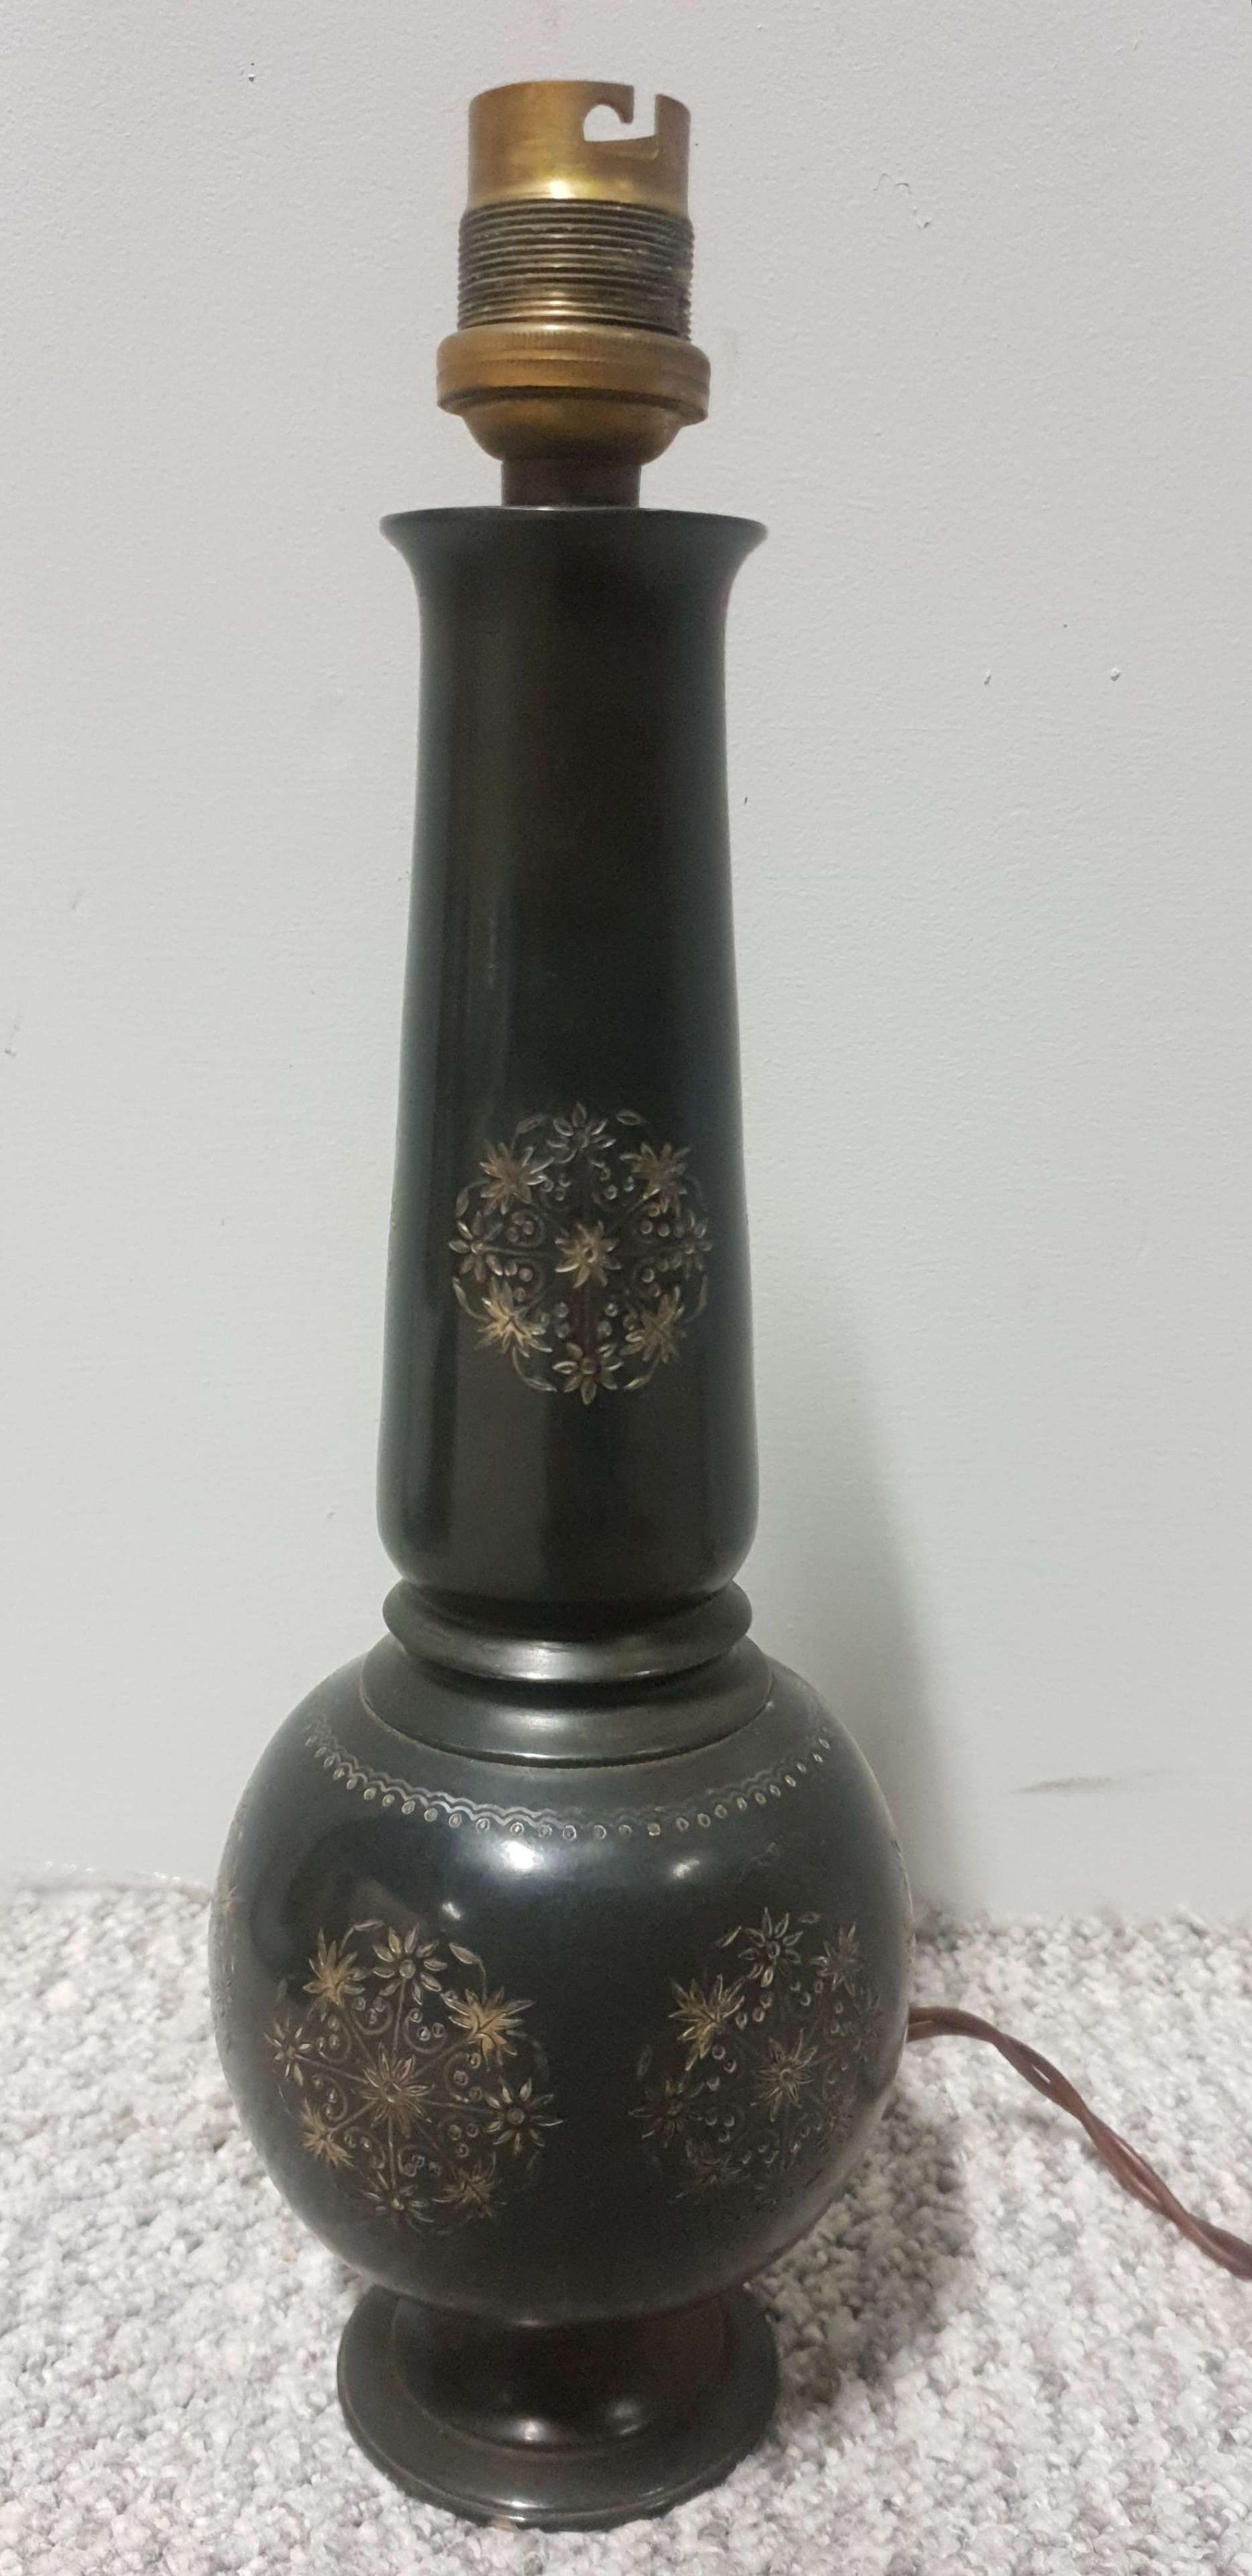 Super Inlaid Silver Table Lamp